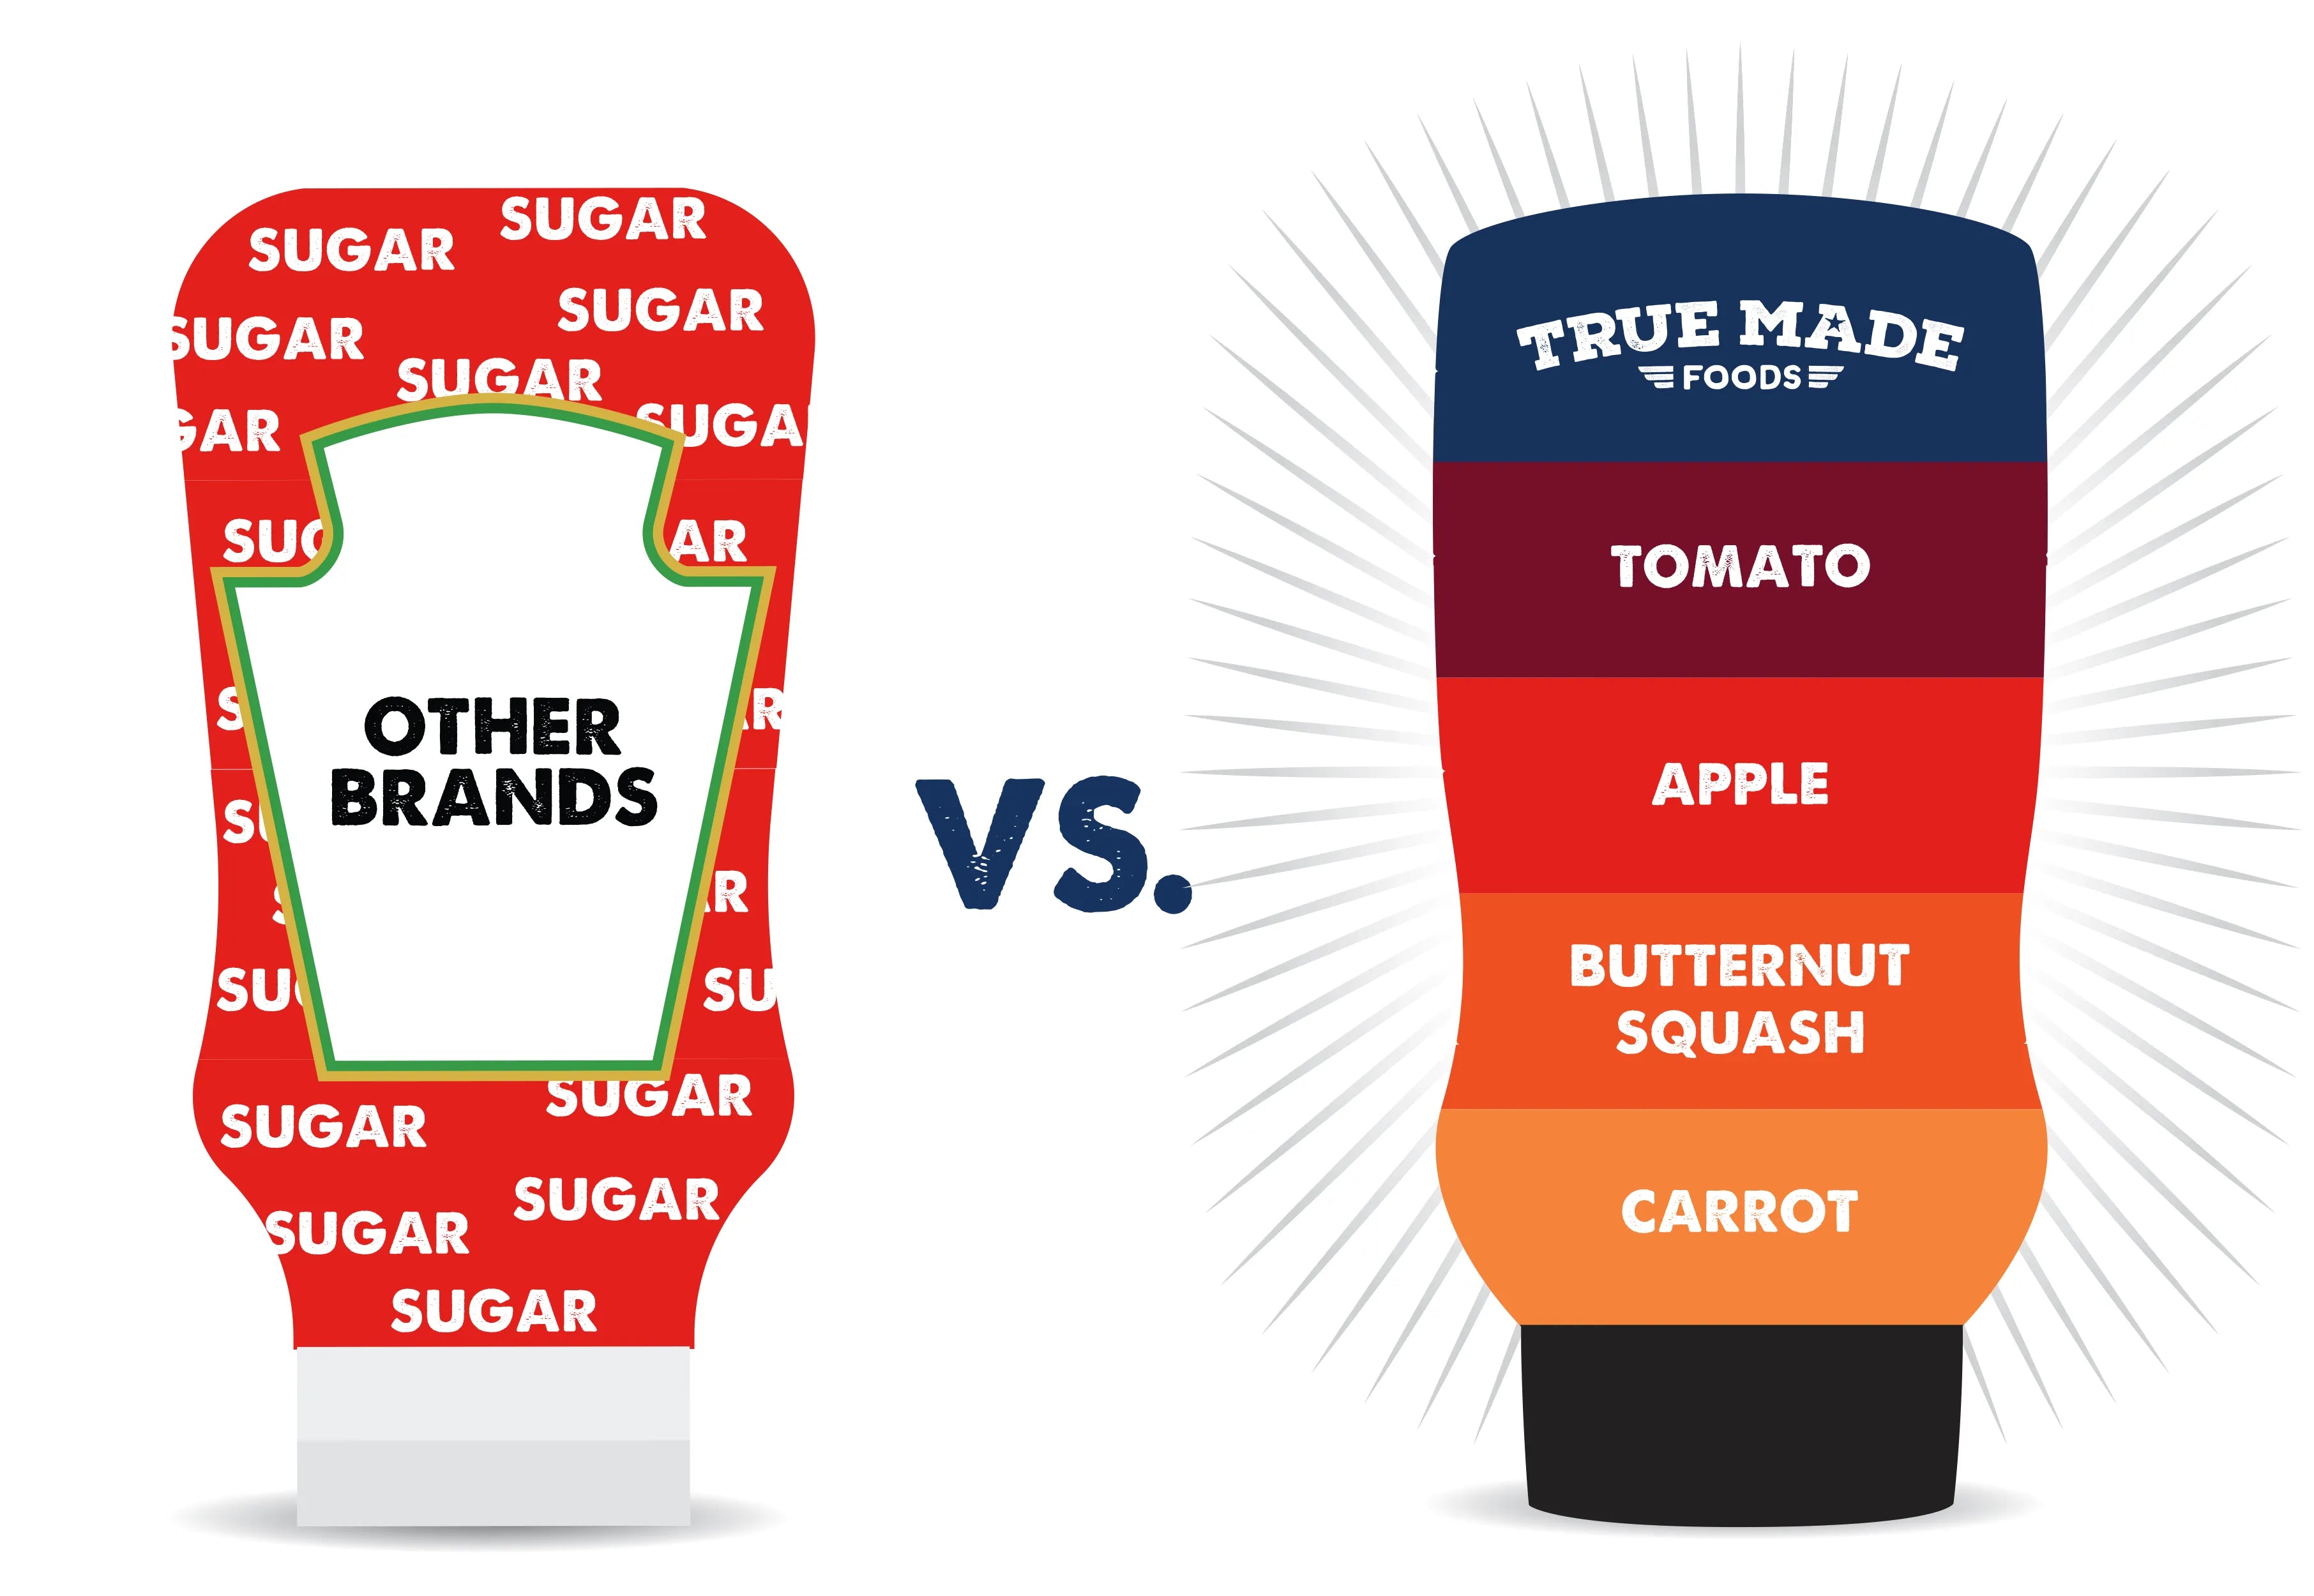 graphic comparing the amount of sugar in other brands versus True Made Food's 0 grams of sugar